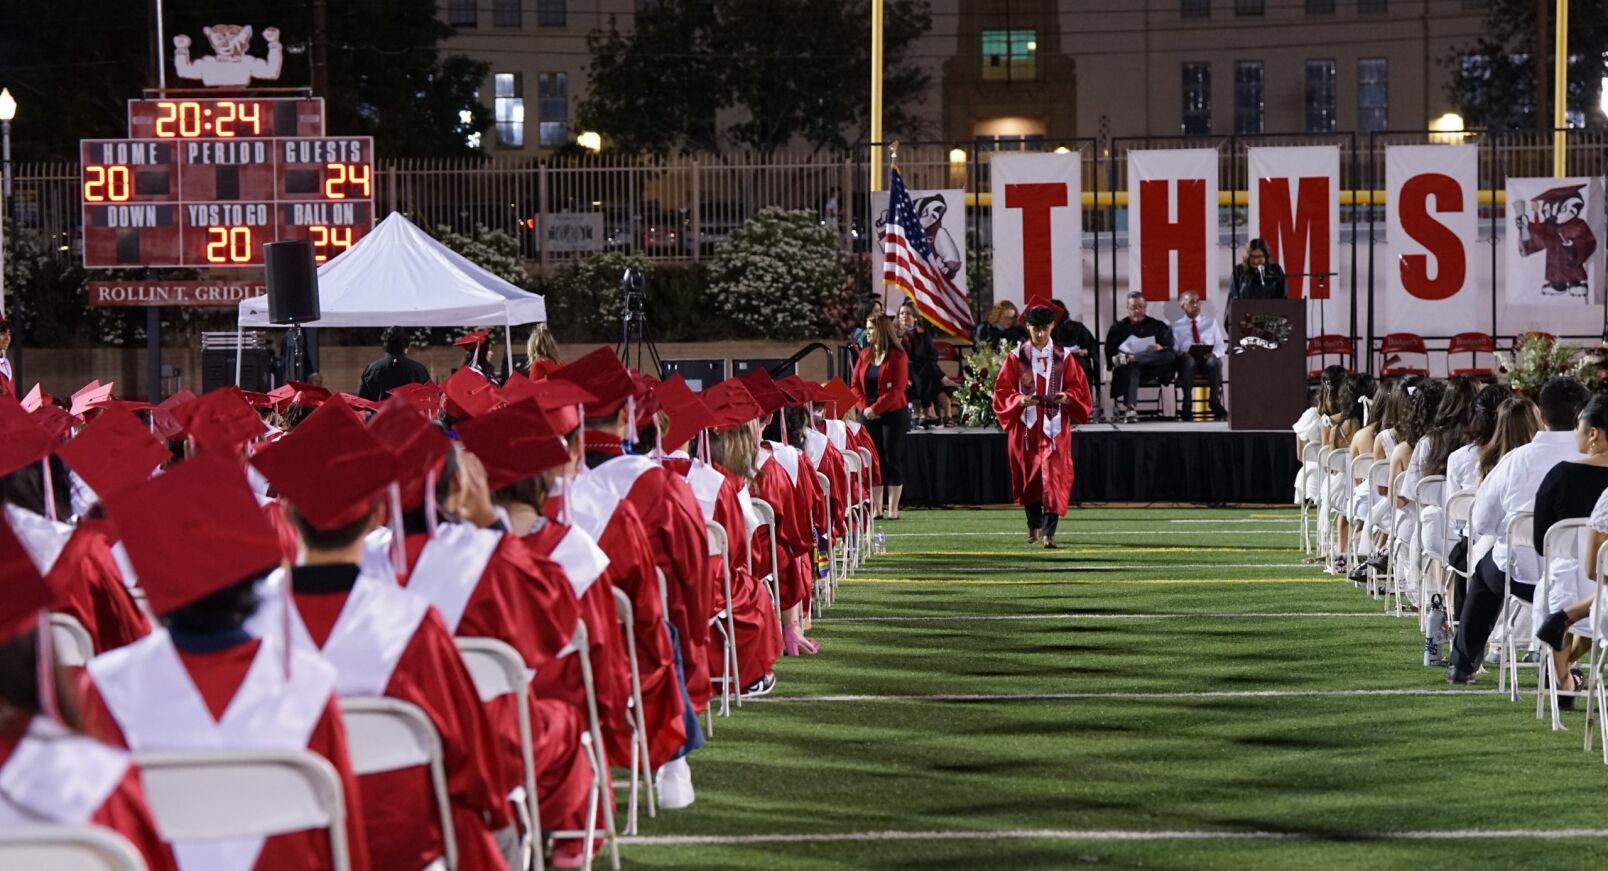 A Tucson High grad walks down the center of the field with his fellow grads seated on either side